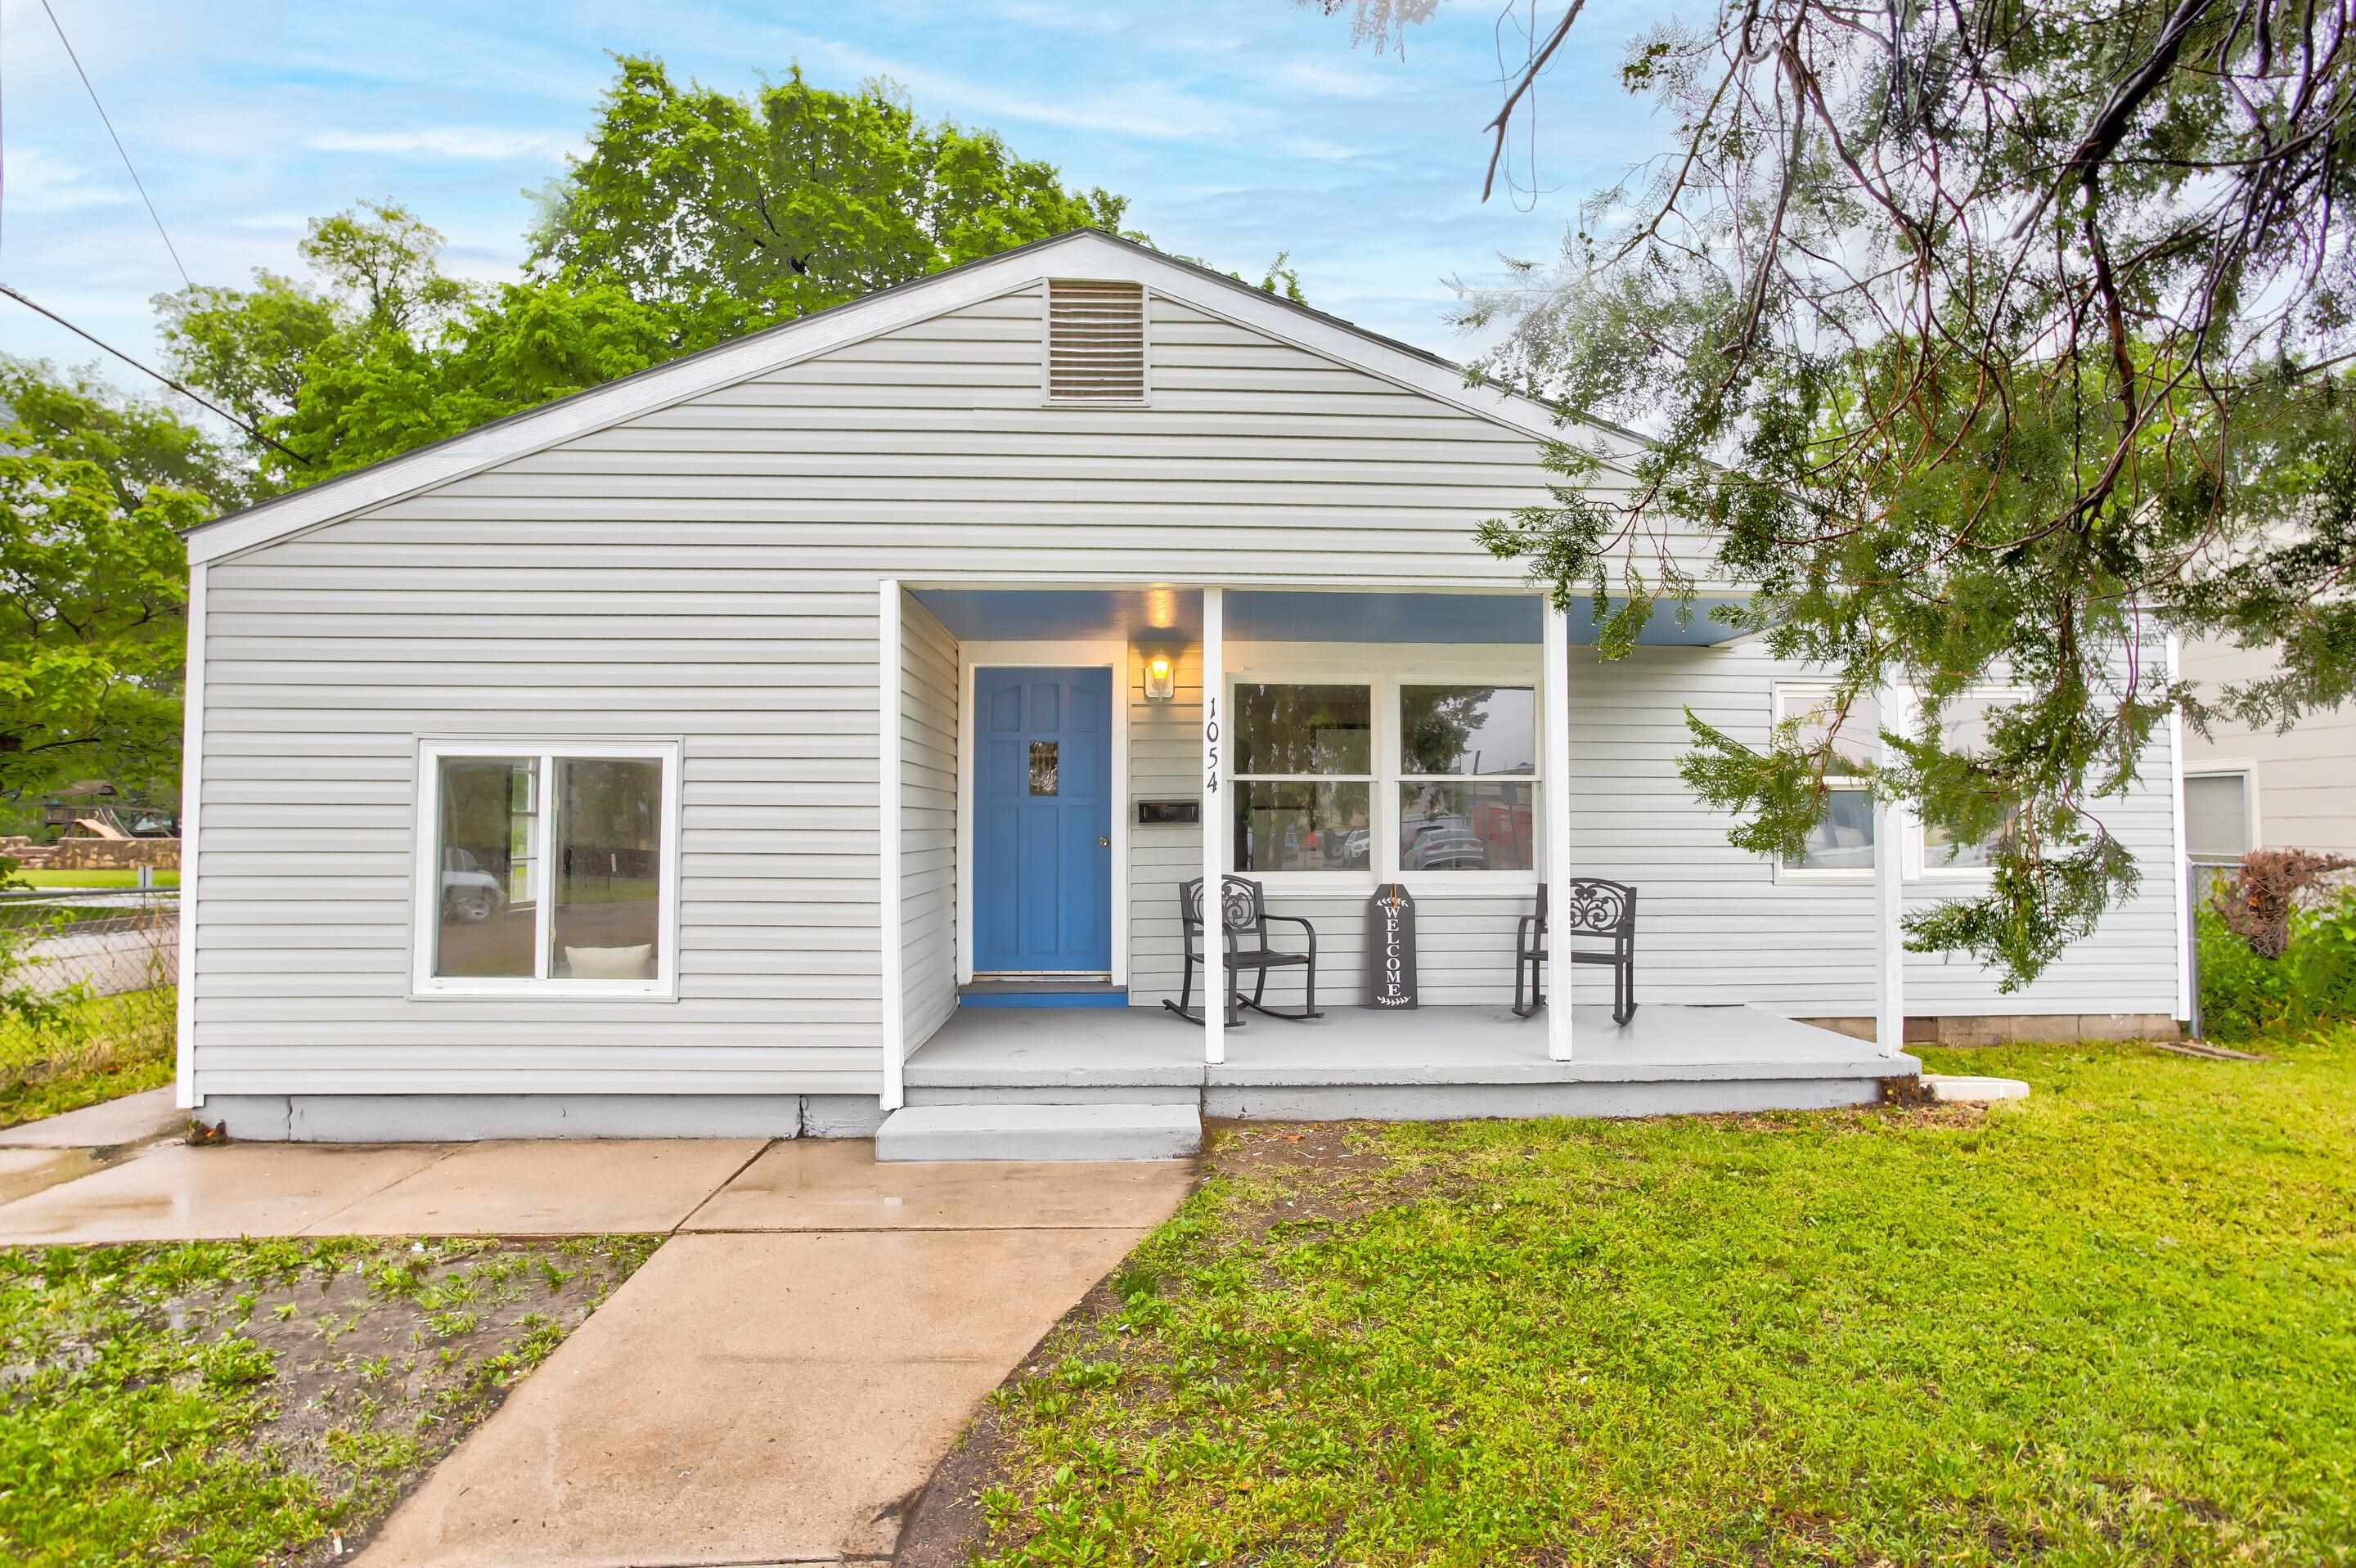 Newly remodeled four bed, two bath cutie of a home! Sprawled across a corner lot, this home has new 